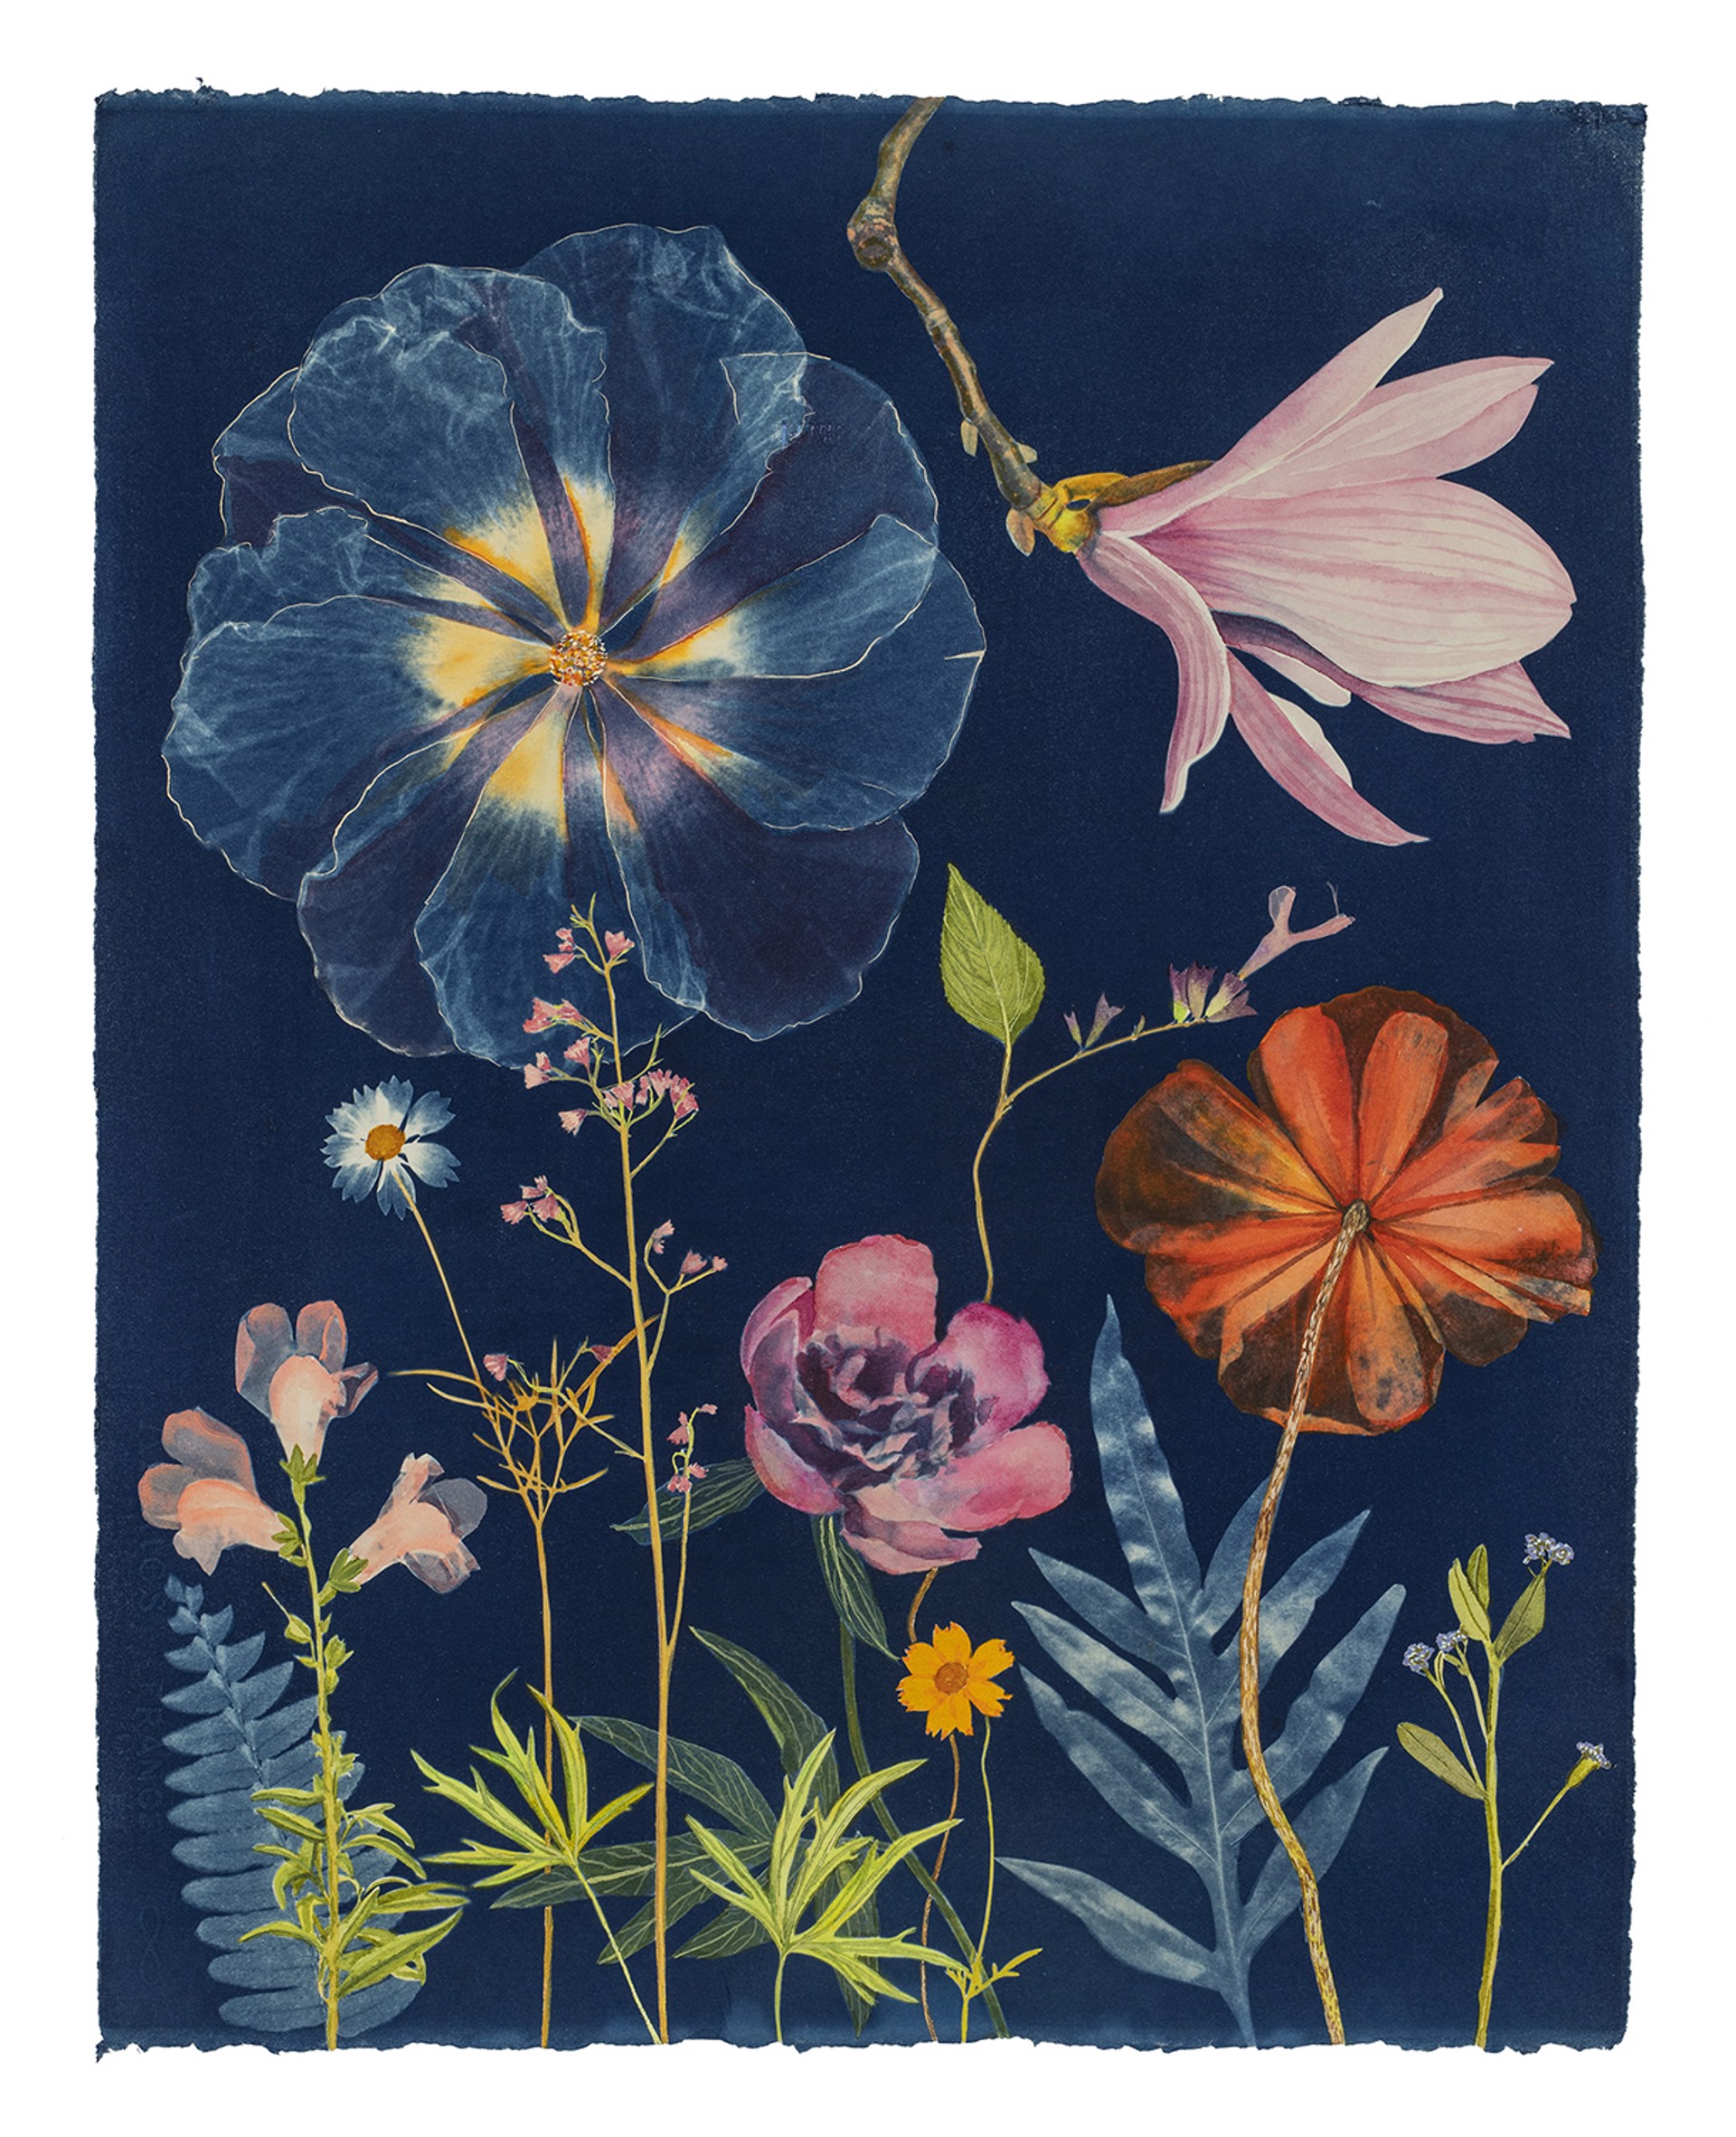 Picturesque Botany (Magnolia, Peony, Poppy, Coral Bells, etc.) by Julia Whitney Barnes